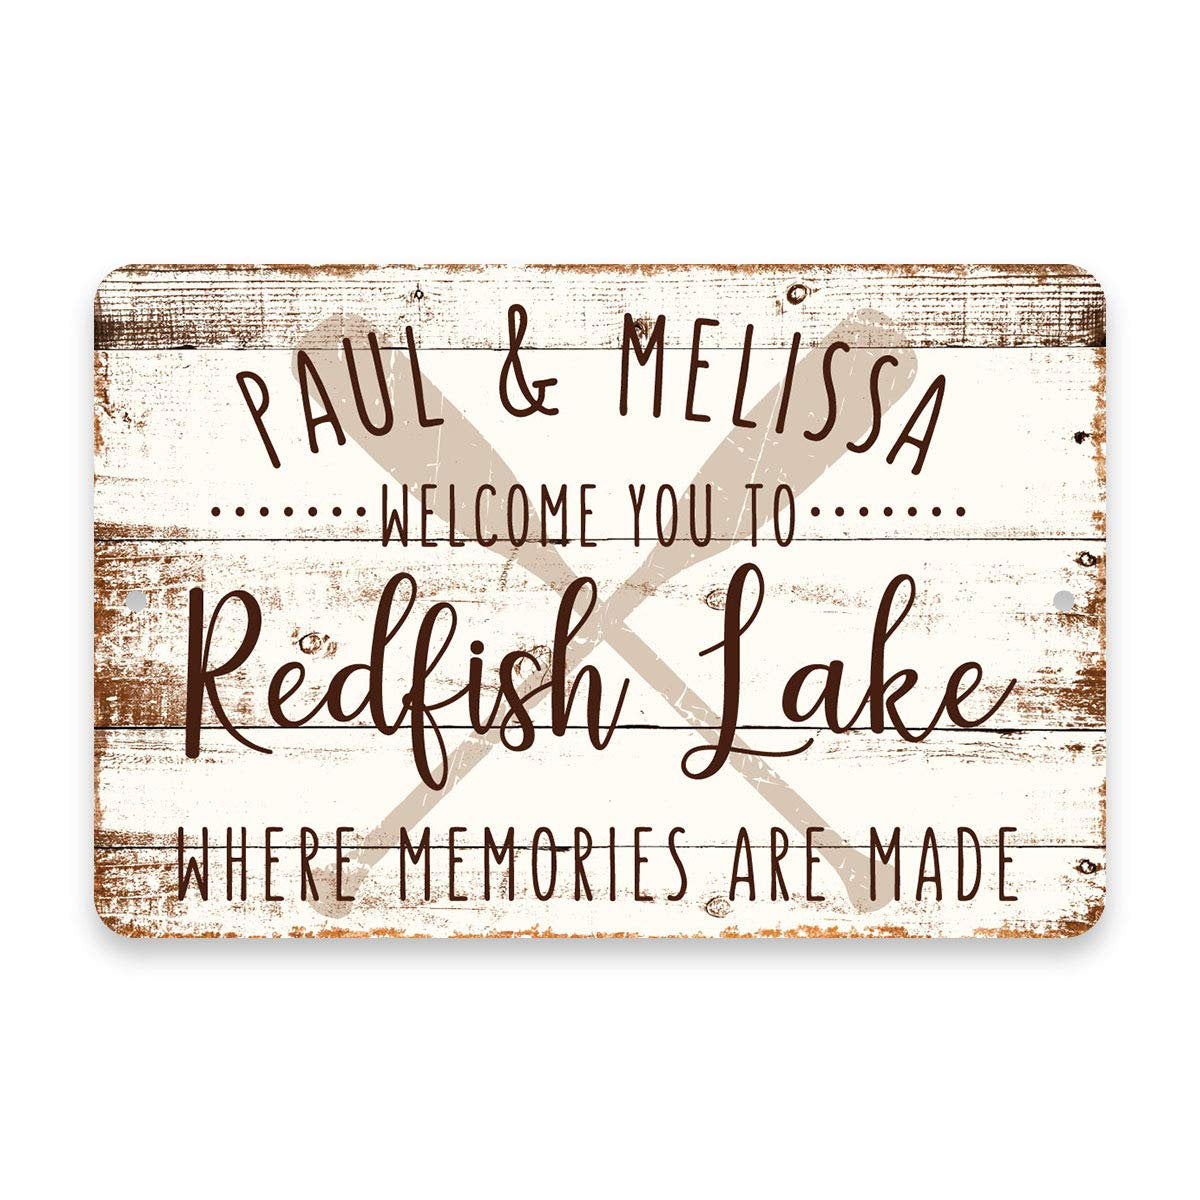 Personalized Welcome to Redfish Lake Where Memories are Made Sign - 8 X 12 Metal Sign with Wood Look